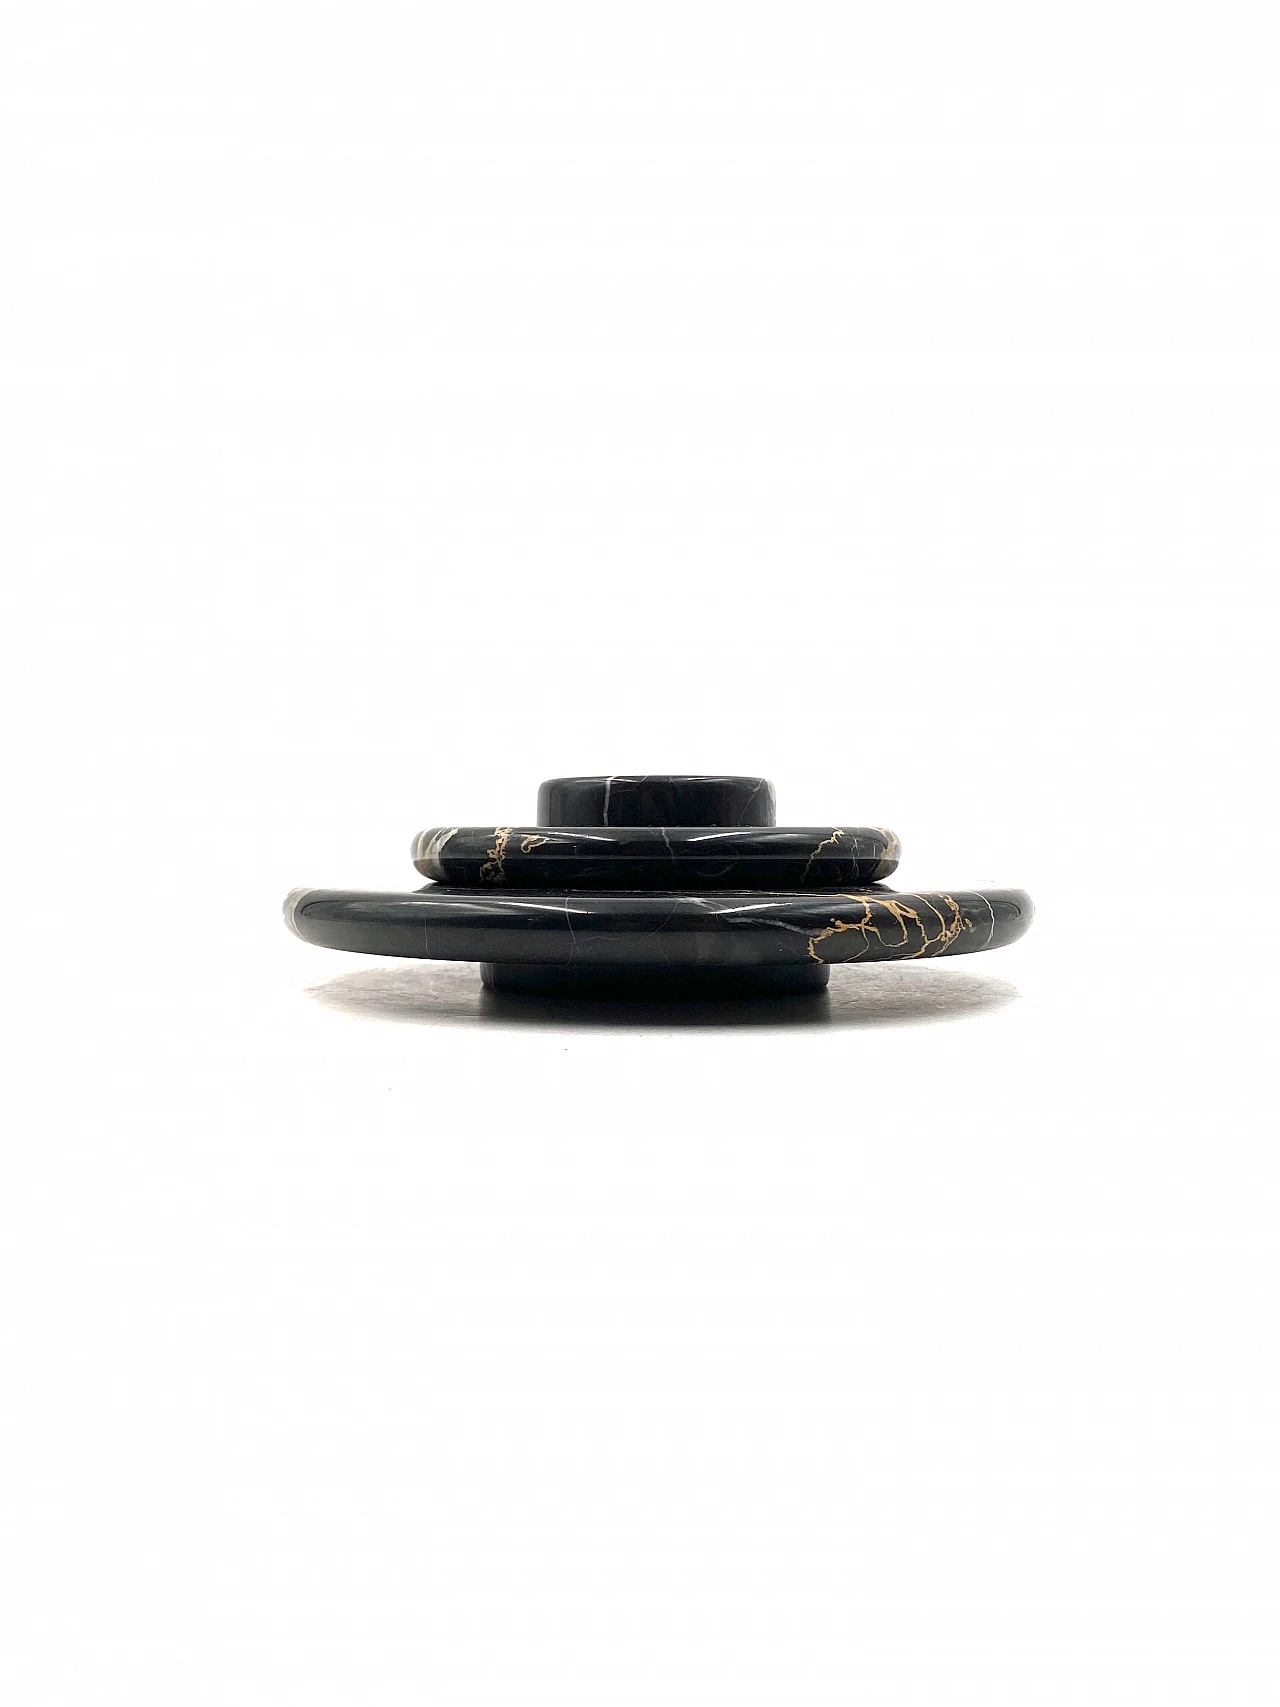 3 Stackable centerpieces in Portoro black marble by Casigliani, 1970s 5